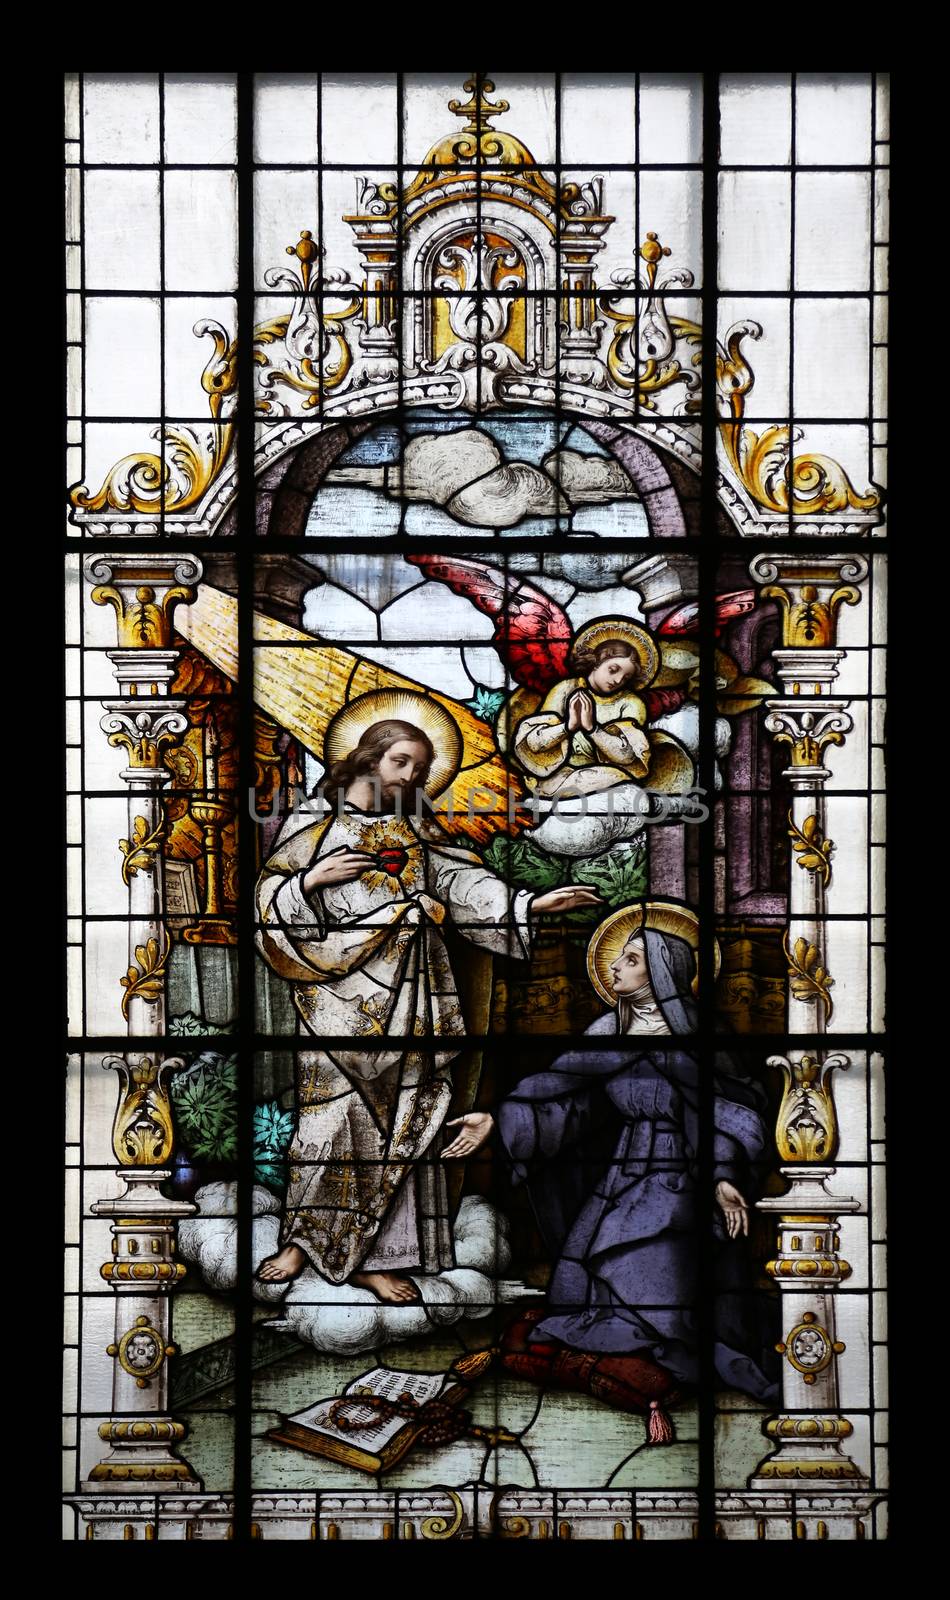 Jesus and Saint Margaret Mary Alacoque, stained glass window in the Basilica of the Sacred Heart of Jesus in Zagreb, Croatia on May 28, 2015